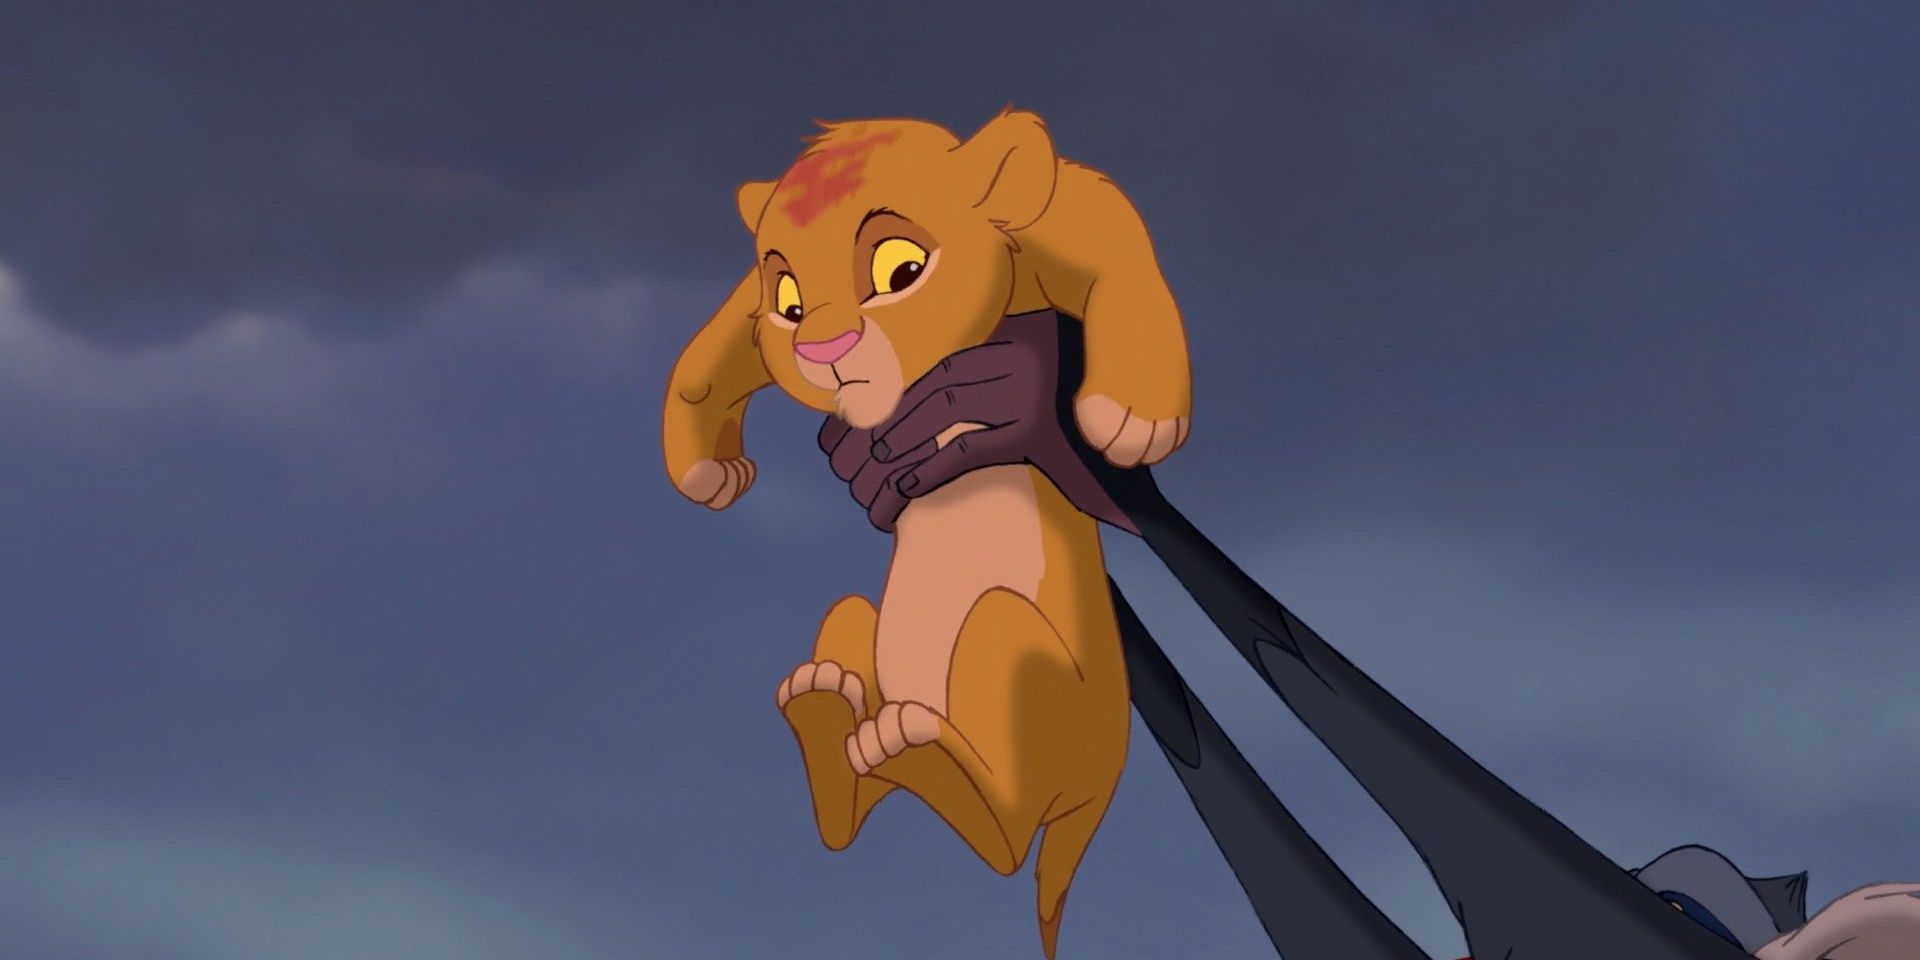 Closeup of Rafiki holding up baby Simba in the Disney film The Lion King